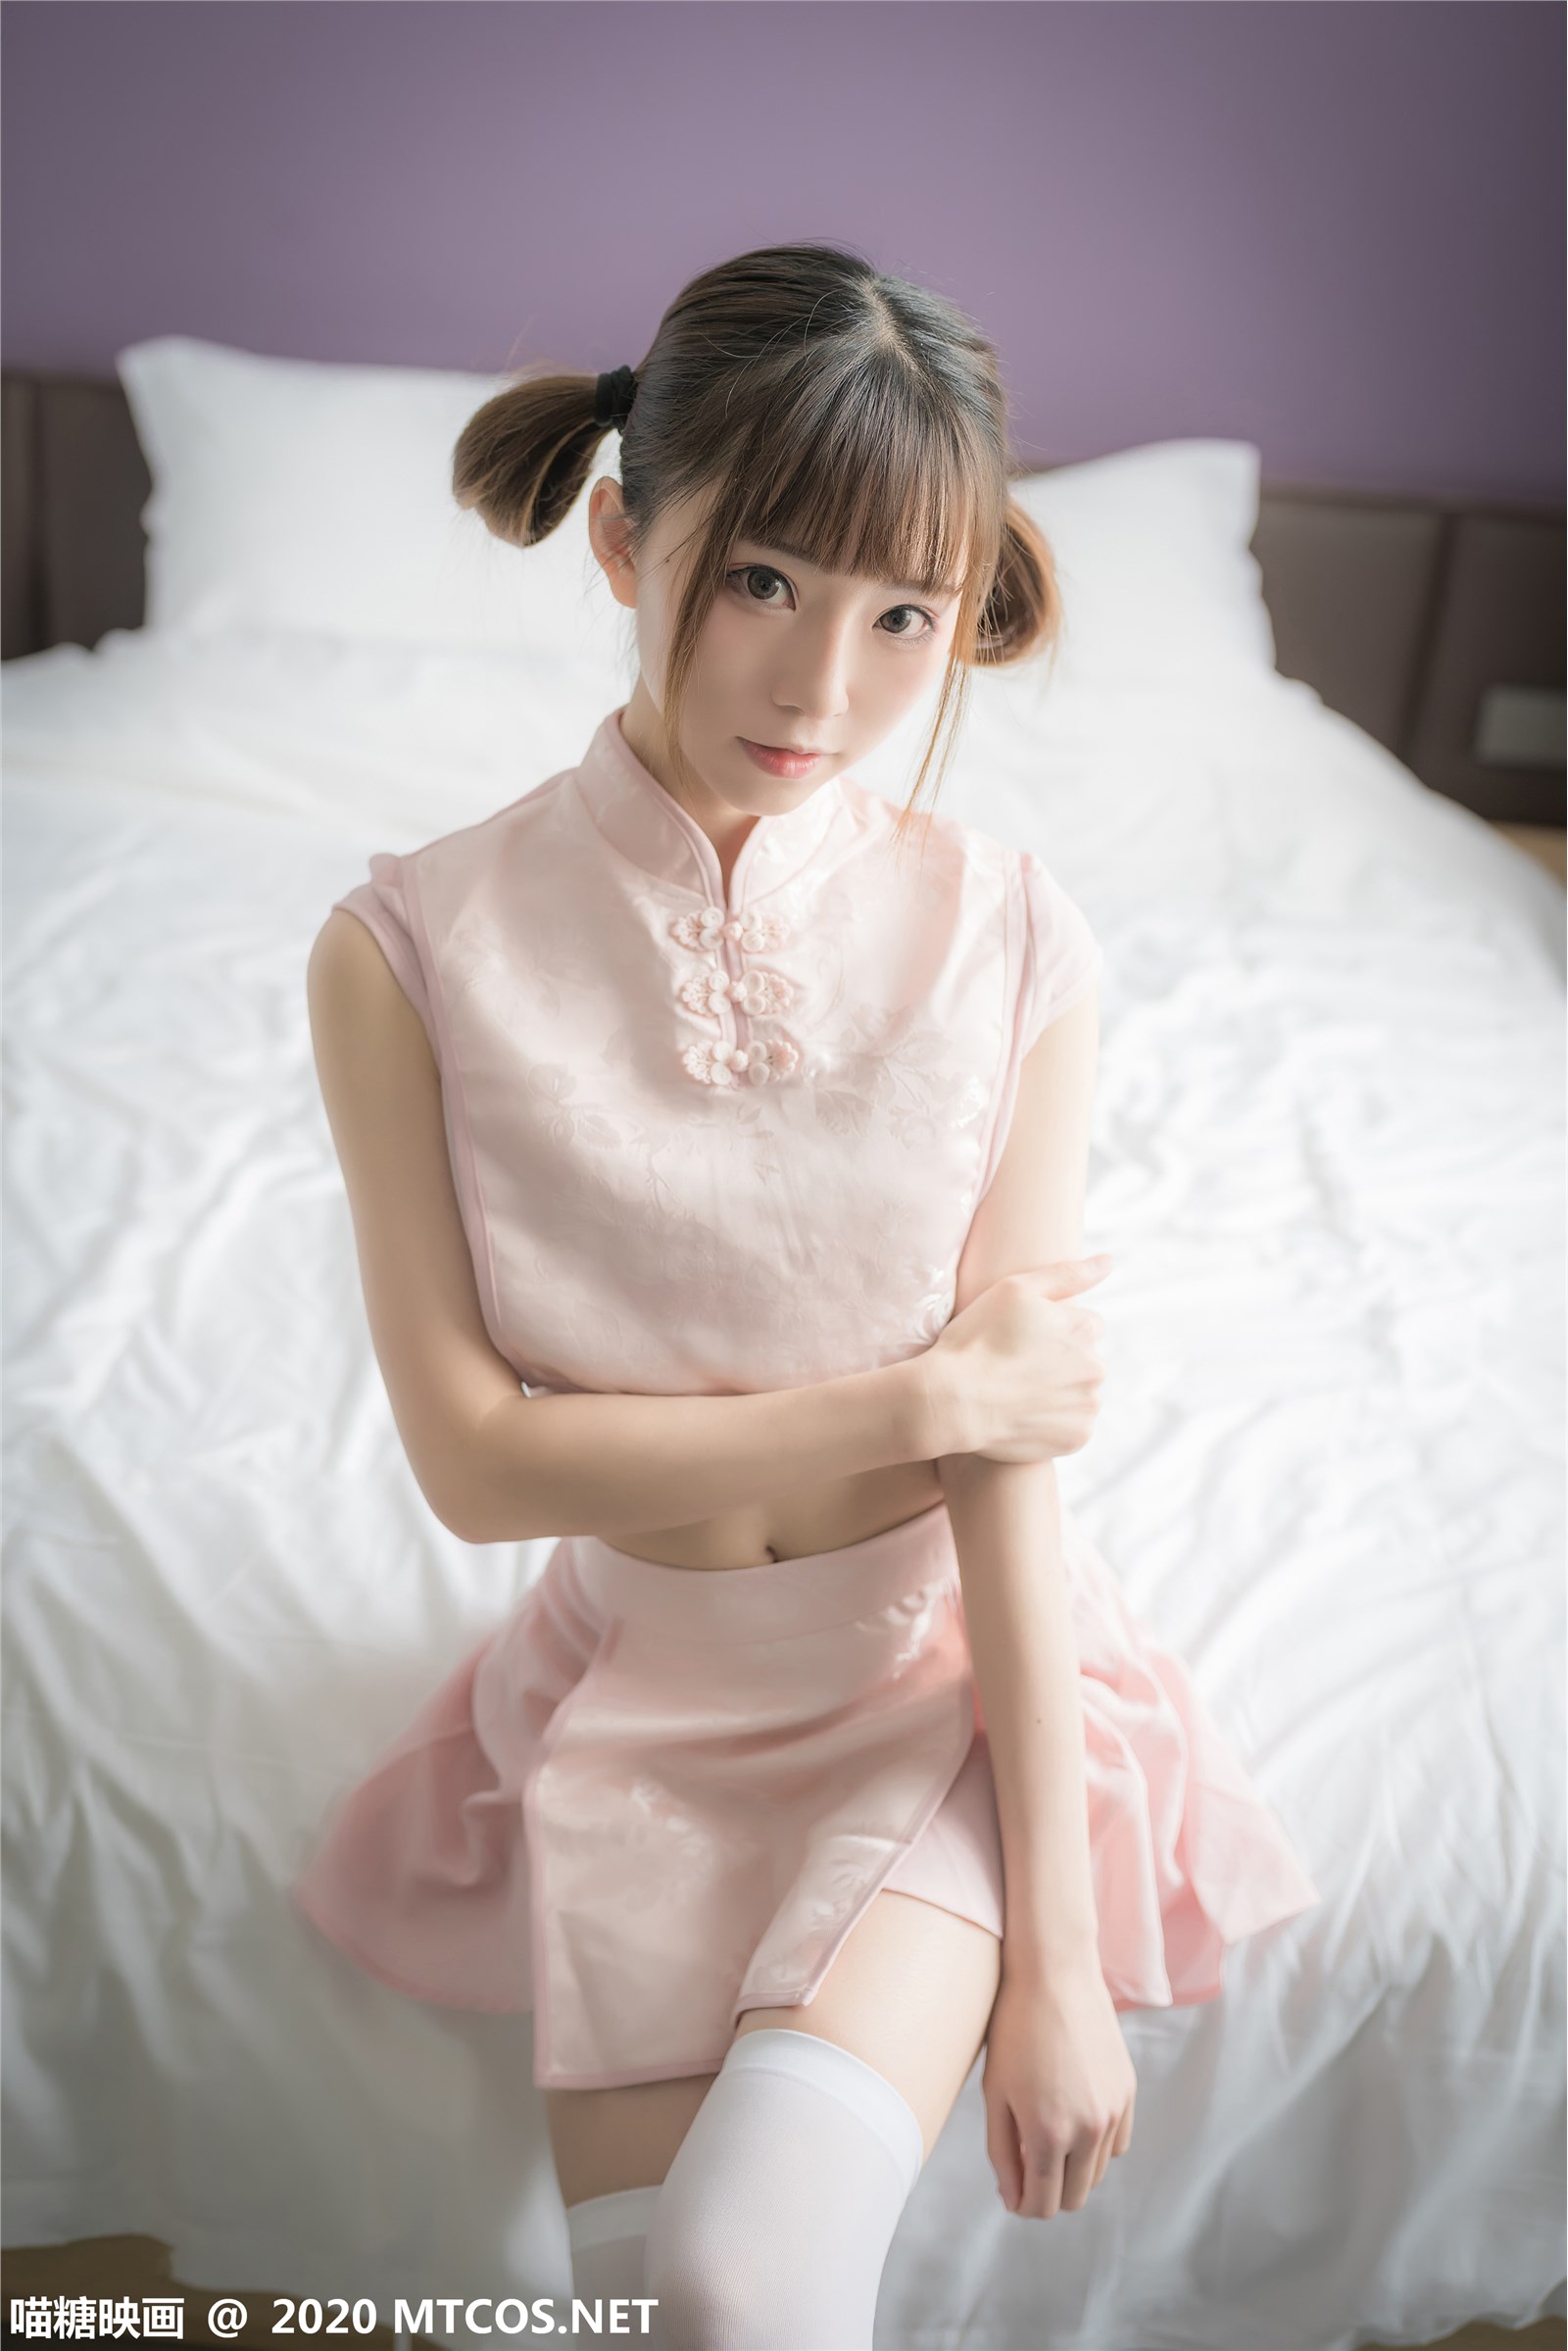 Meow sugar picture Vol.188 pink ball(12)